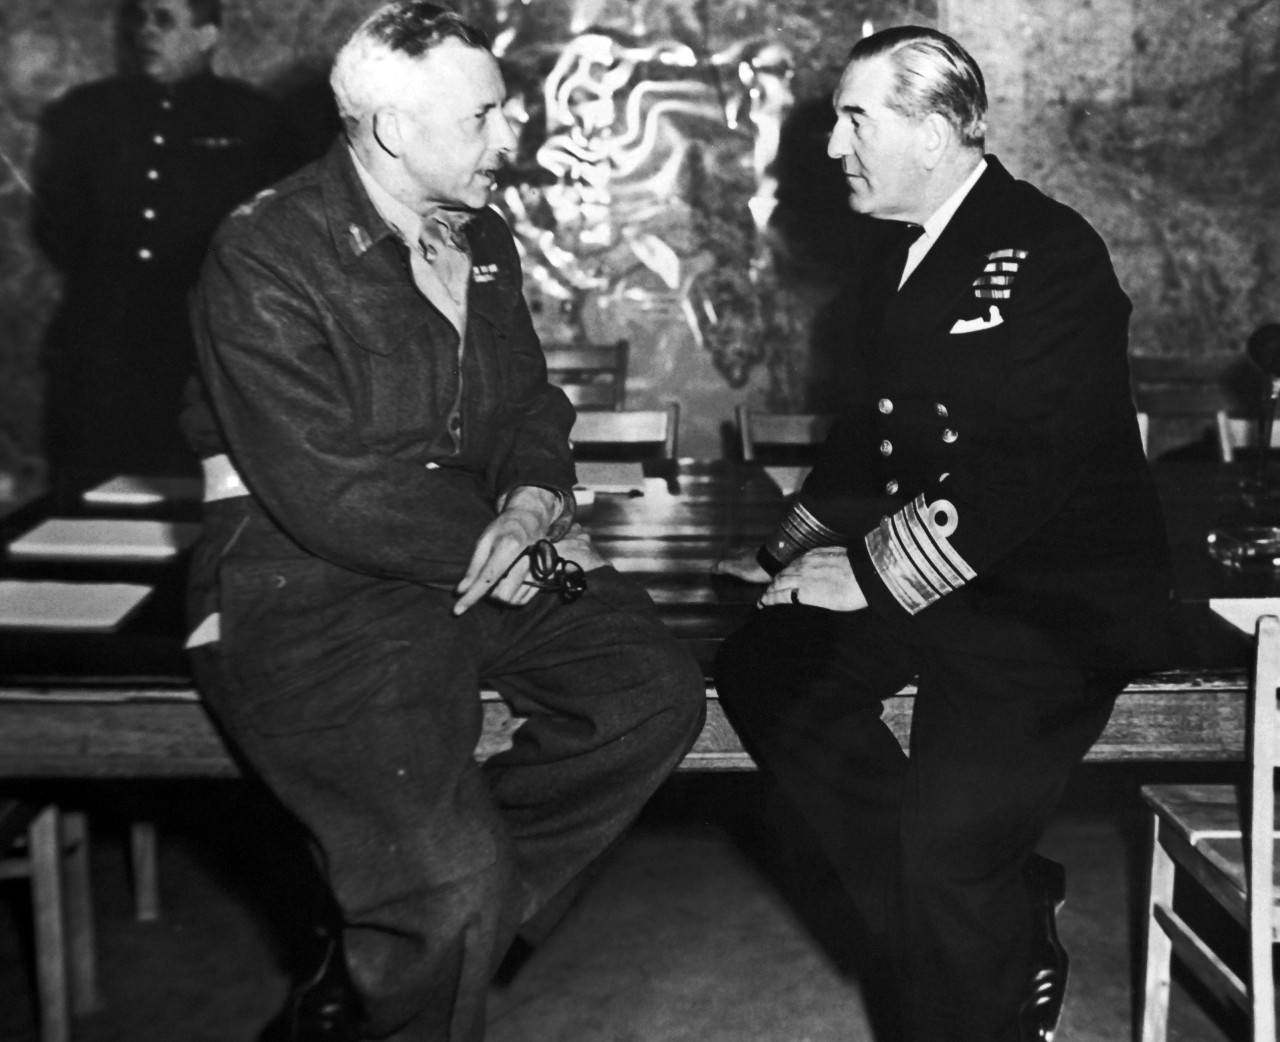 111-SC-27428:   Surrender of Germany, May 7, 1945.  While representatives of the German government discuss unconditional surrender terms in another room, Lieutenant General F.E. Morgan, Deputy Chief of Staff and Admiral Sir Harold M. Burrough, Allied Naval Commander in Chief of Expeditionary Forces, calmly discuss the military decline in Germany in the SHAEF War Room at Reims, France, where the surrender terms were presented, May 5, 1945.  U.S. Army photograph.  Courtesy of the Library of Congress Collection, Lot-8988. (2015/10/16).